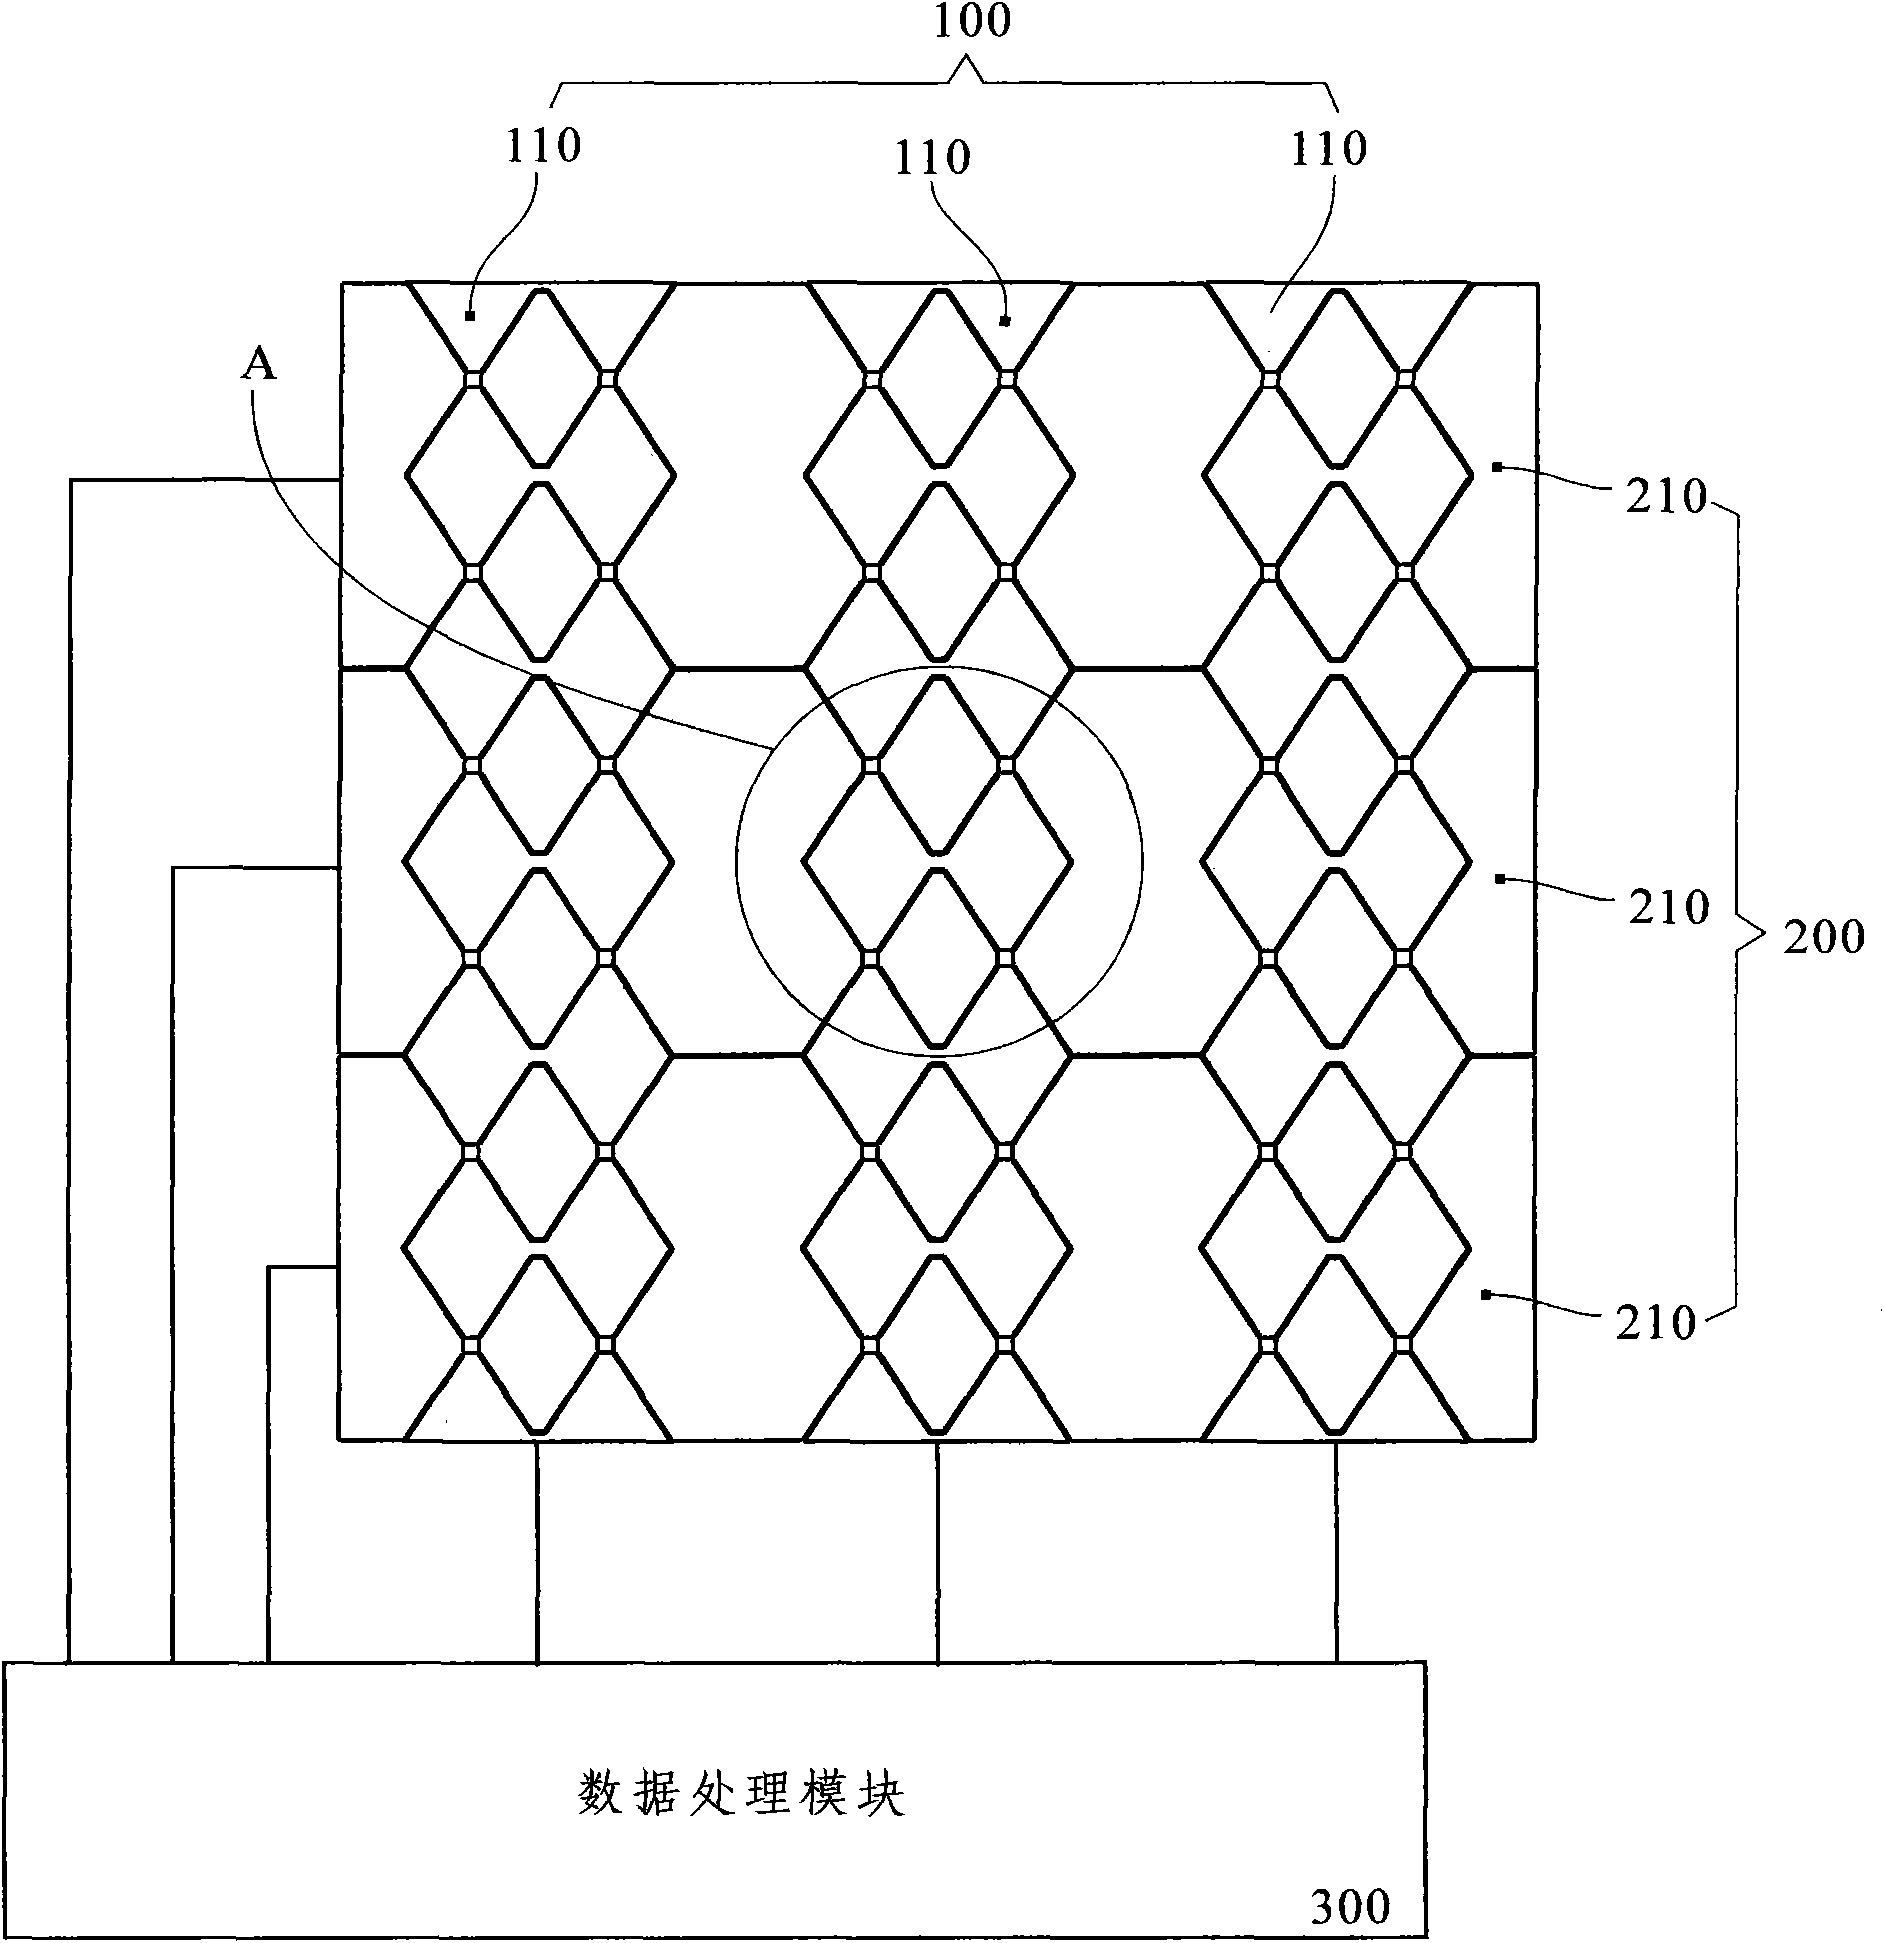 Capacitive touch screen with mesh-like electrodes